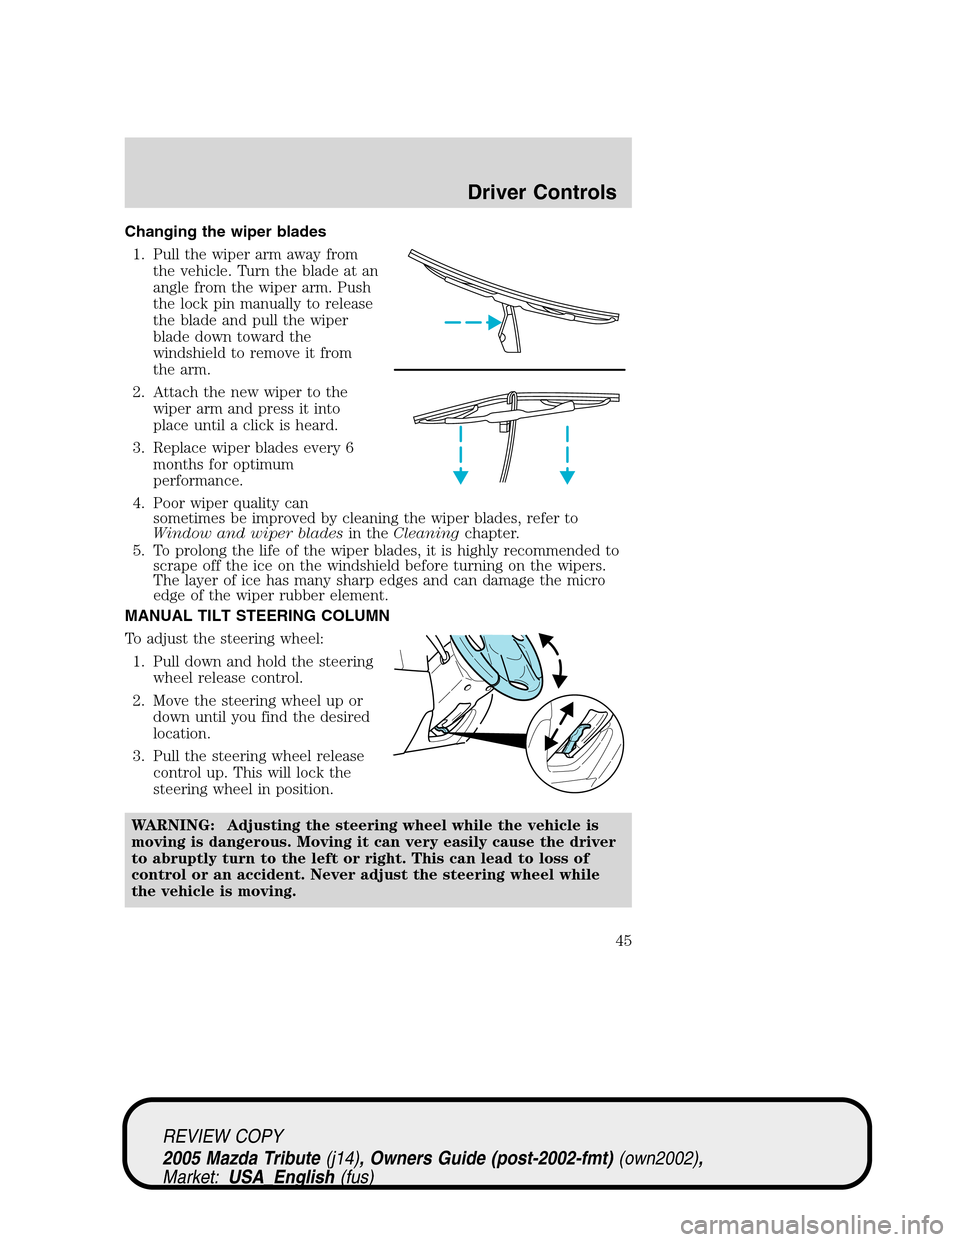 MAZDA MODEL TRIBUTE 2005  Owners Manual (in English) Changing the wiper blades
1. Pull the wiper arm away from
the vehicle. Turn the blade at an
angle from the wiper arm. Push
the lock pin manually to release
the blade and pull the wiper
blade down towa